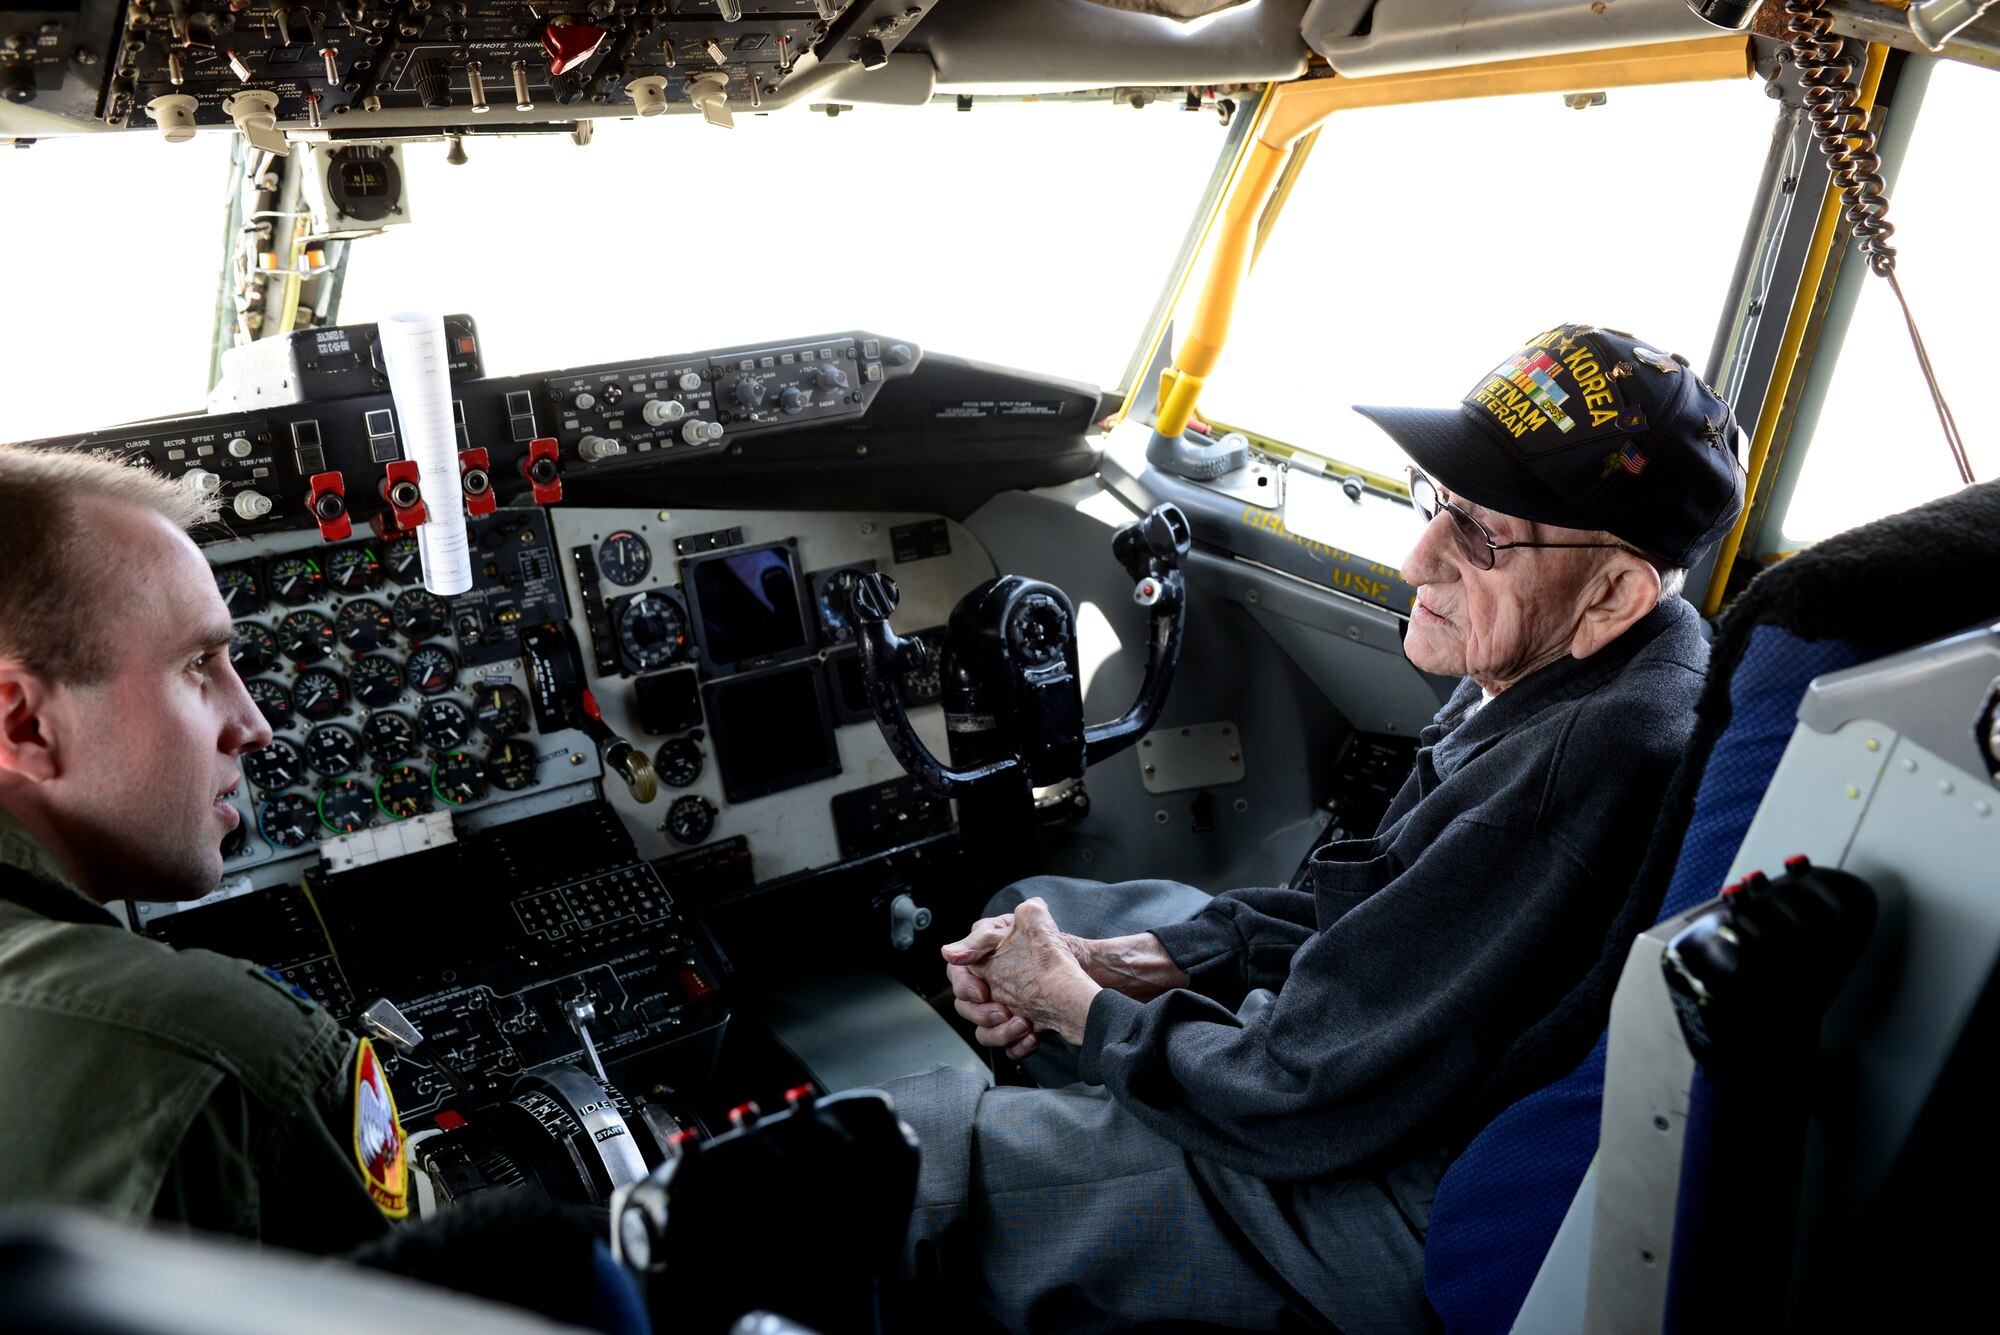 Capt. Jacob Allen, an executive officer for the 64th Air refueling Squadron, (left) talks with retired Chief Master Sgt. Albert Paine, a World War II, Korean and Vietnam War pilot, inside a New Hampshire Air National Guard KC-135, May 8, 2015 Pease Air National Guard Base, N.H. Paine visited to talk about his career as an enlisted pilot during three major wars. (N.H. Air National Guard photo by Airman Ashlyn J. Correia)